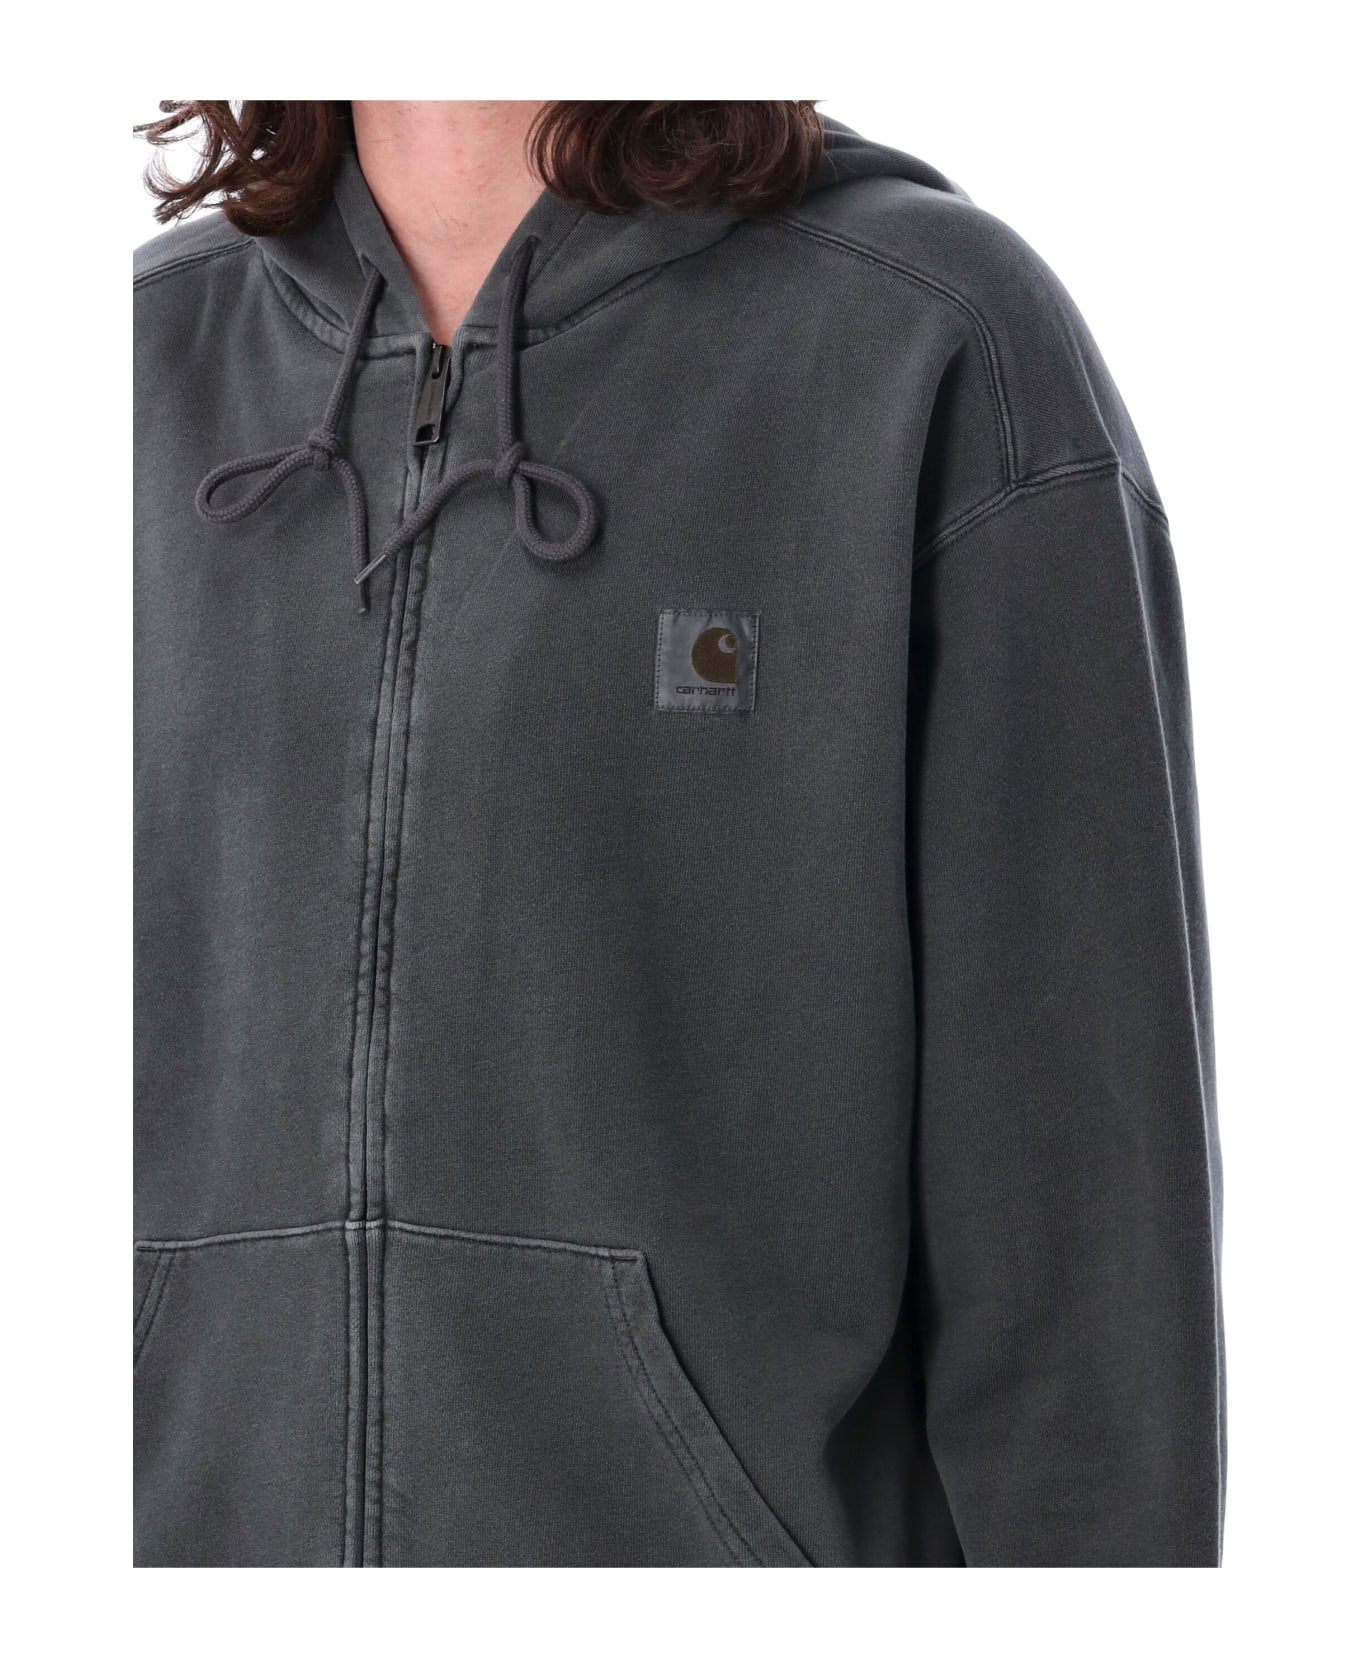 Carhartt Hooded Nelson Jacket - CHARCOAL GARMENT DYED